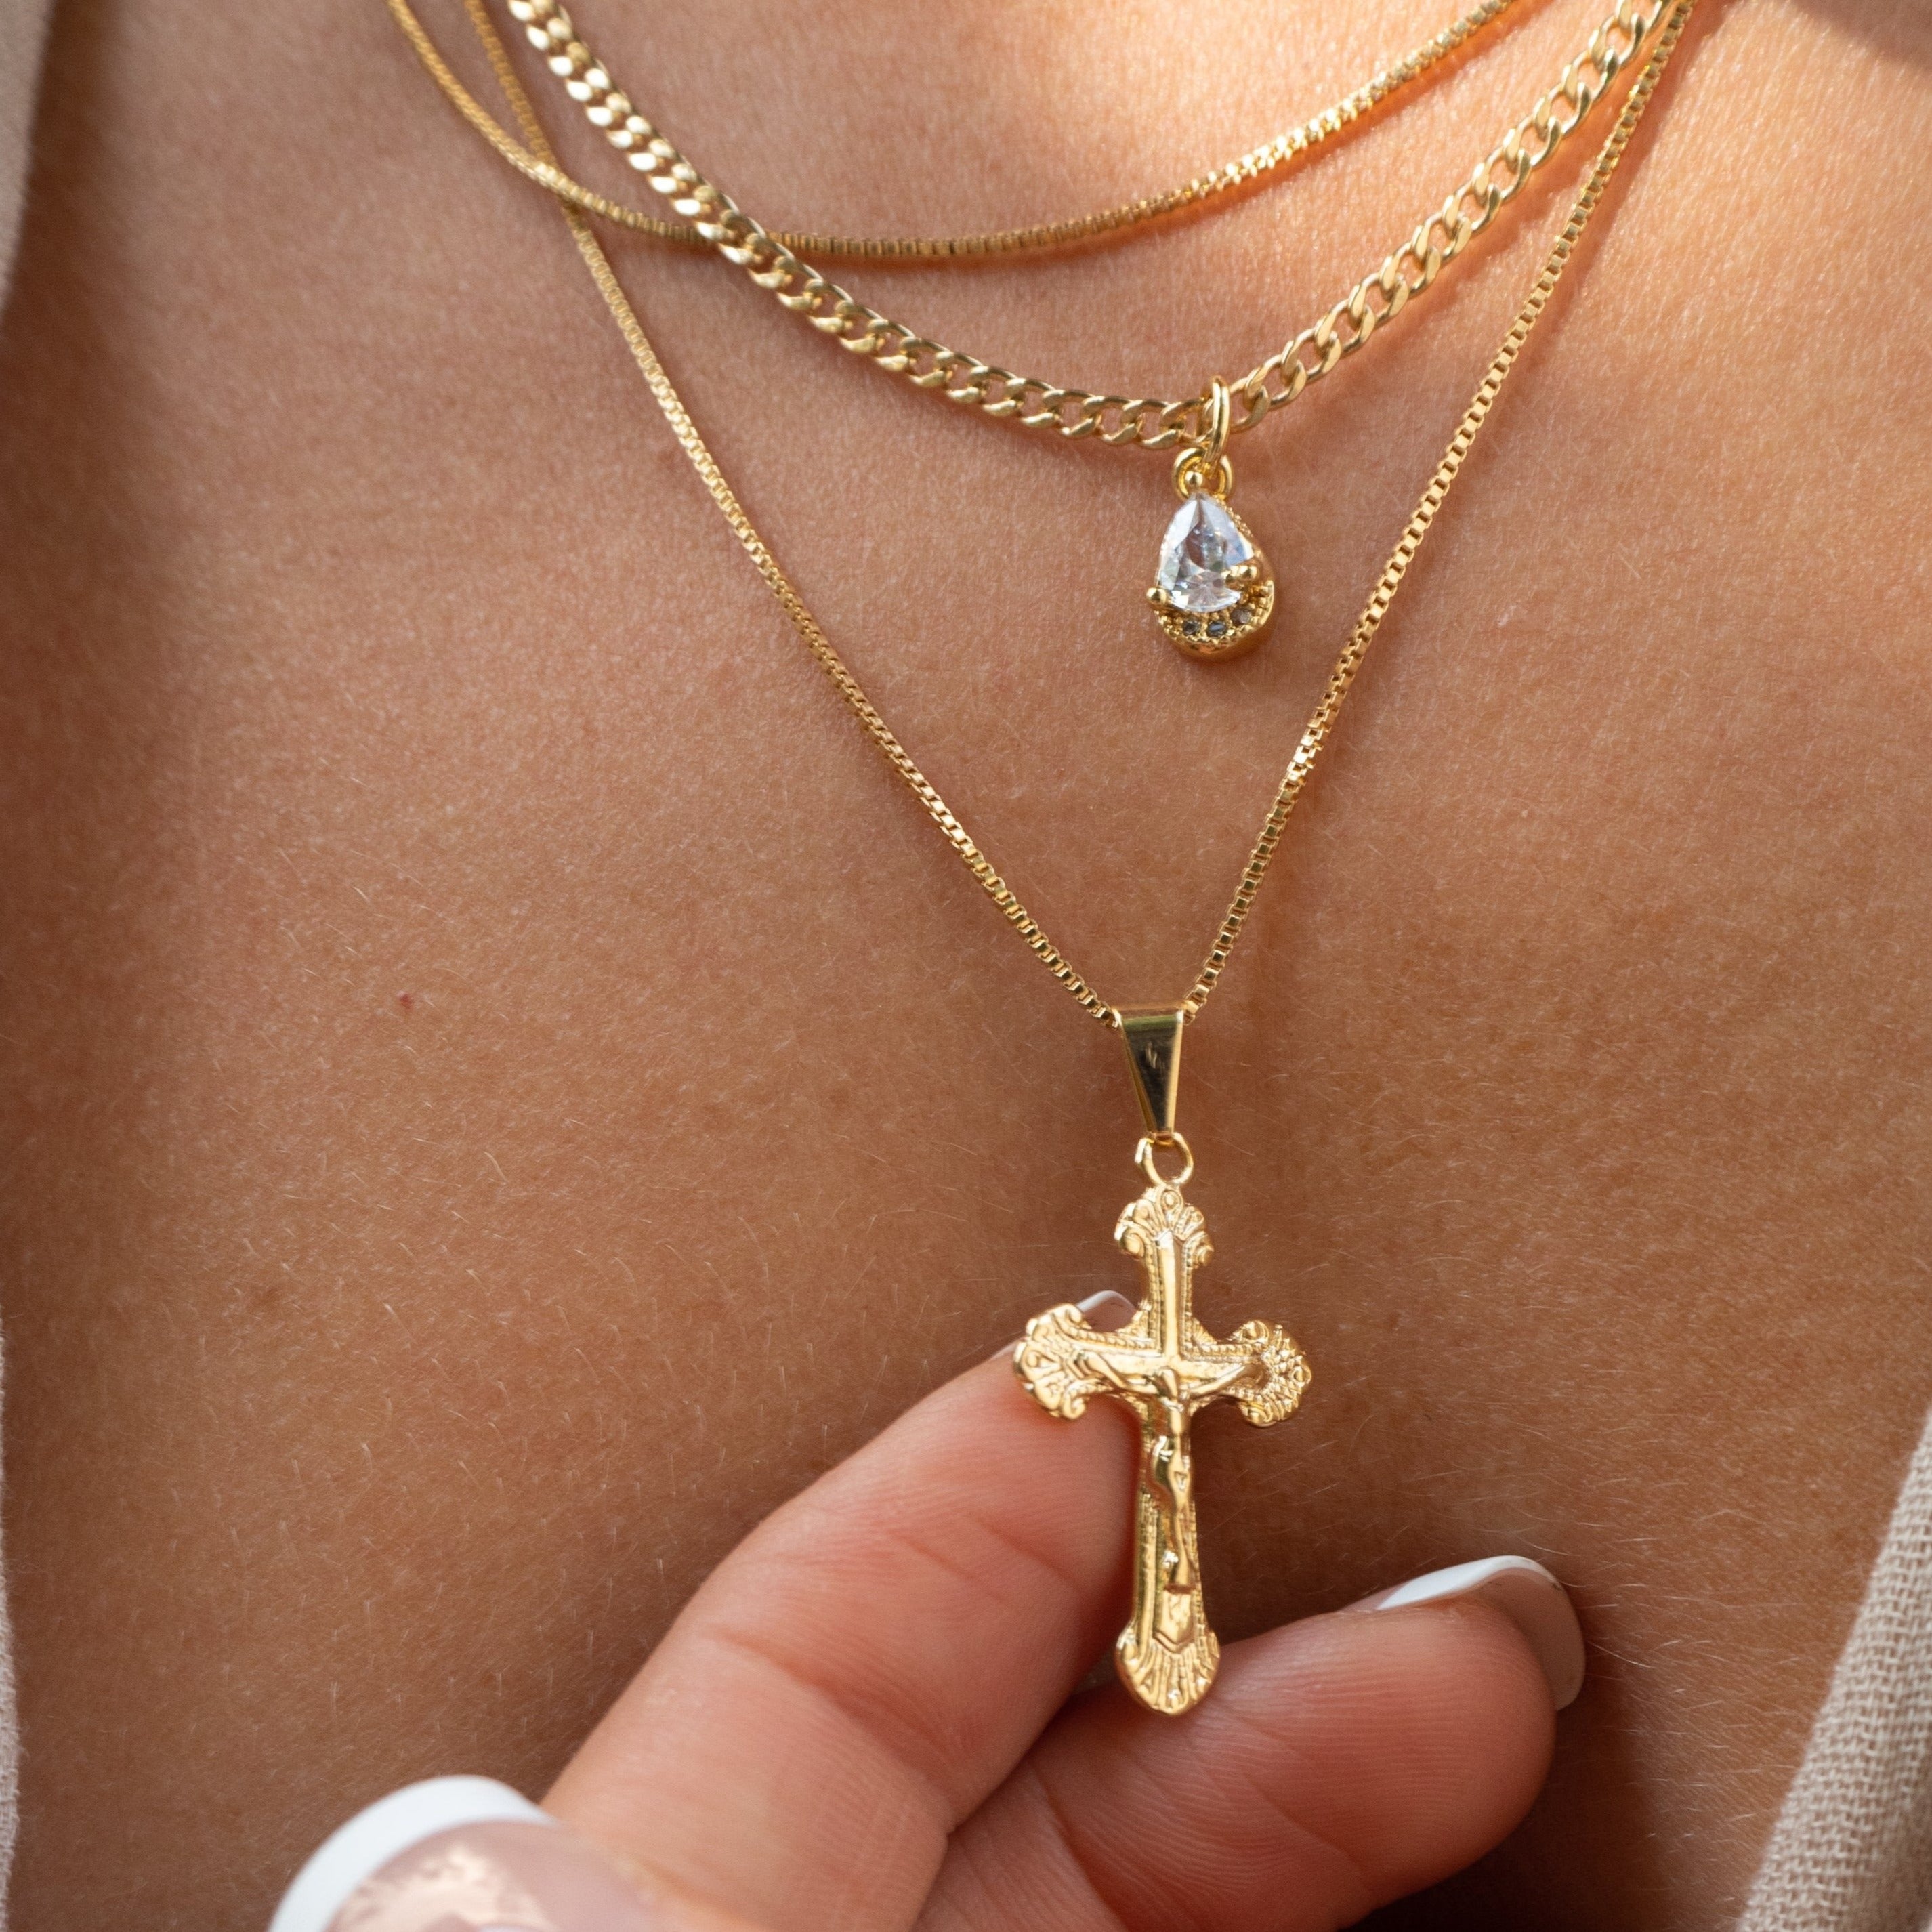 cross necklace, cross pendant, necklace with cross, gold filled necklace, gold cross, dainty cross necklace, dainty pendant, dainty necklace, layering necklace, dainty necklace, layered neckace, cross jewelry